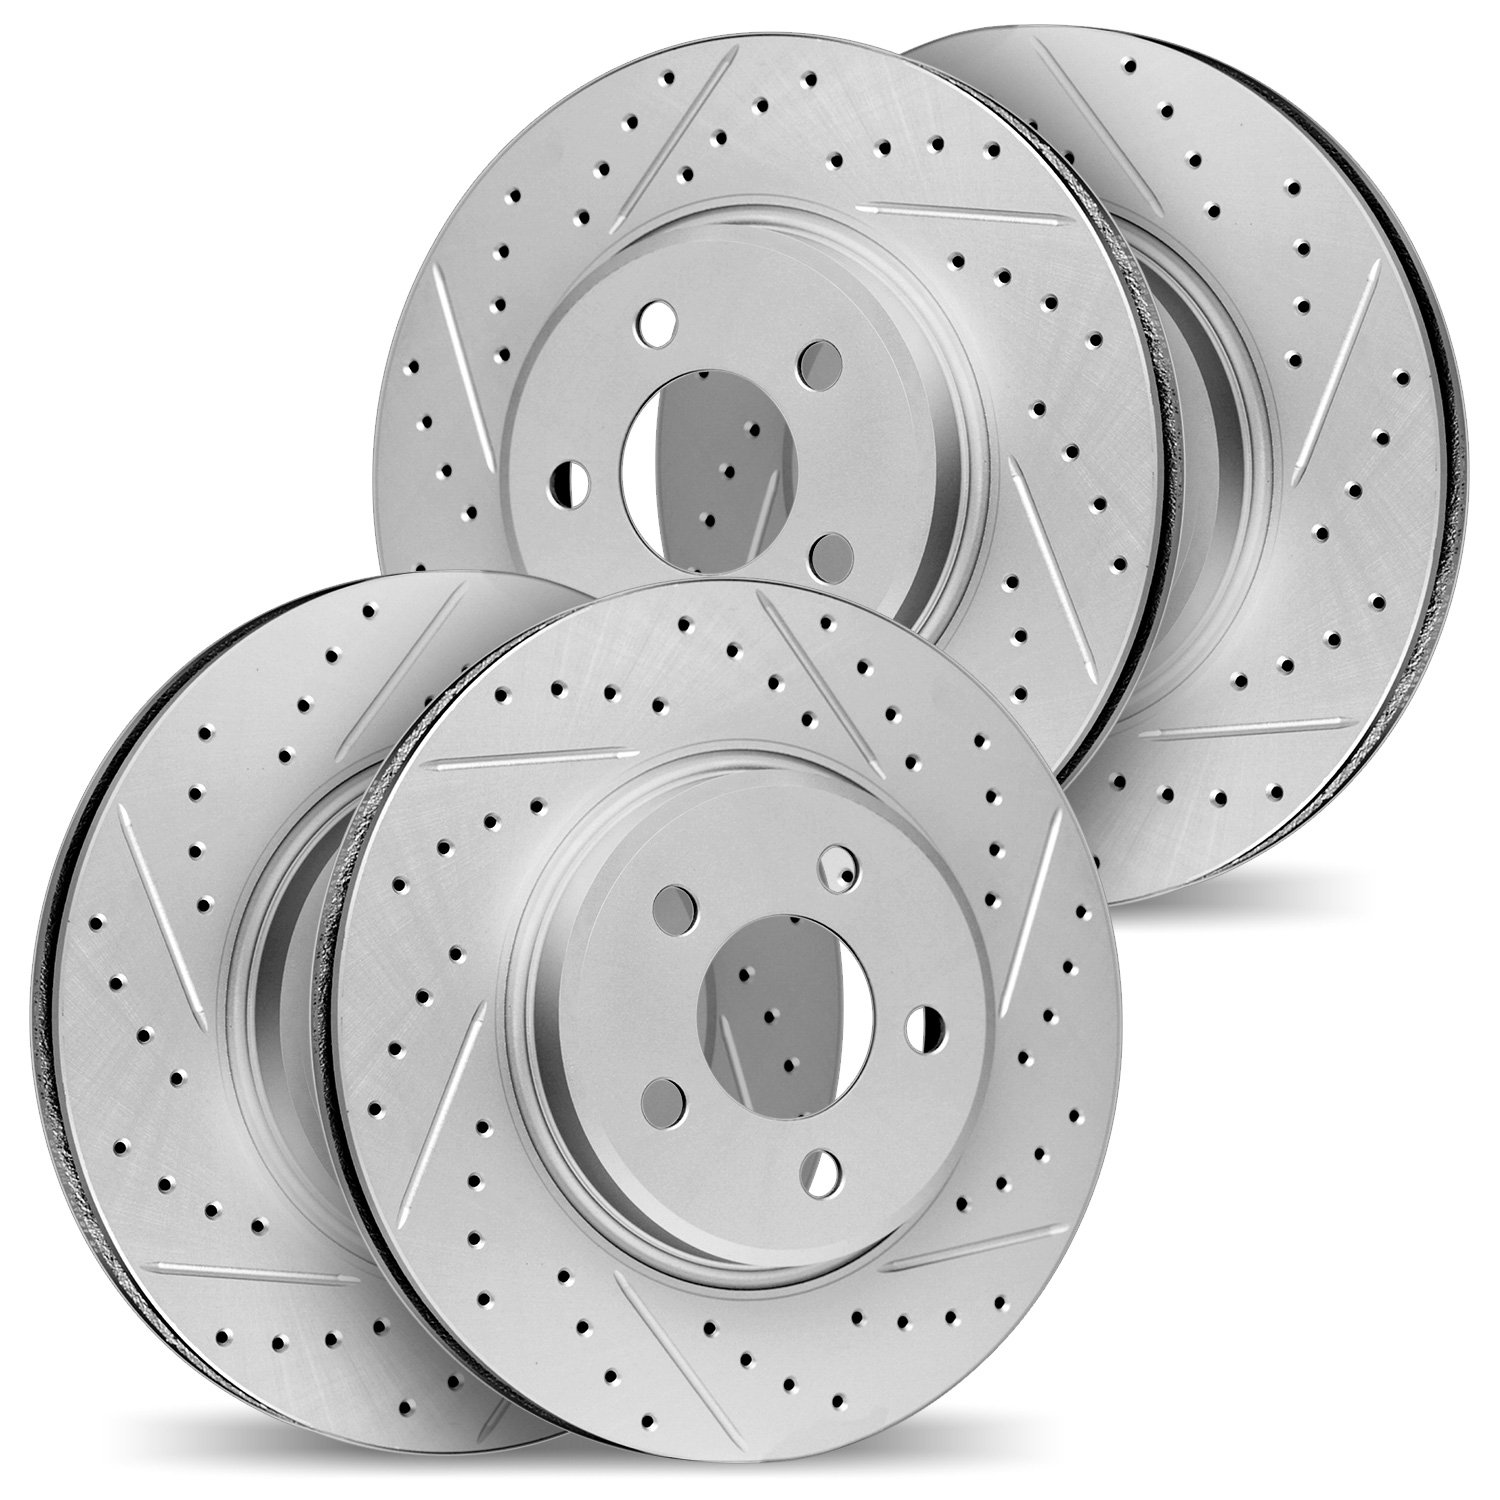 2004-67046 Geoperformance Drilled/Slotted Brake Rotors, Fits Select Multiple Makes/Models, Position: Front and Rear